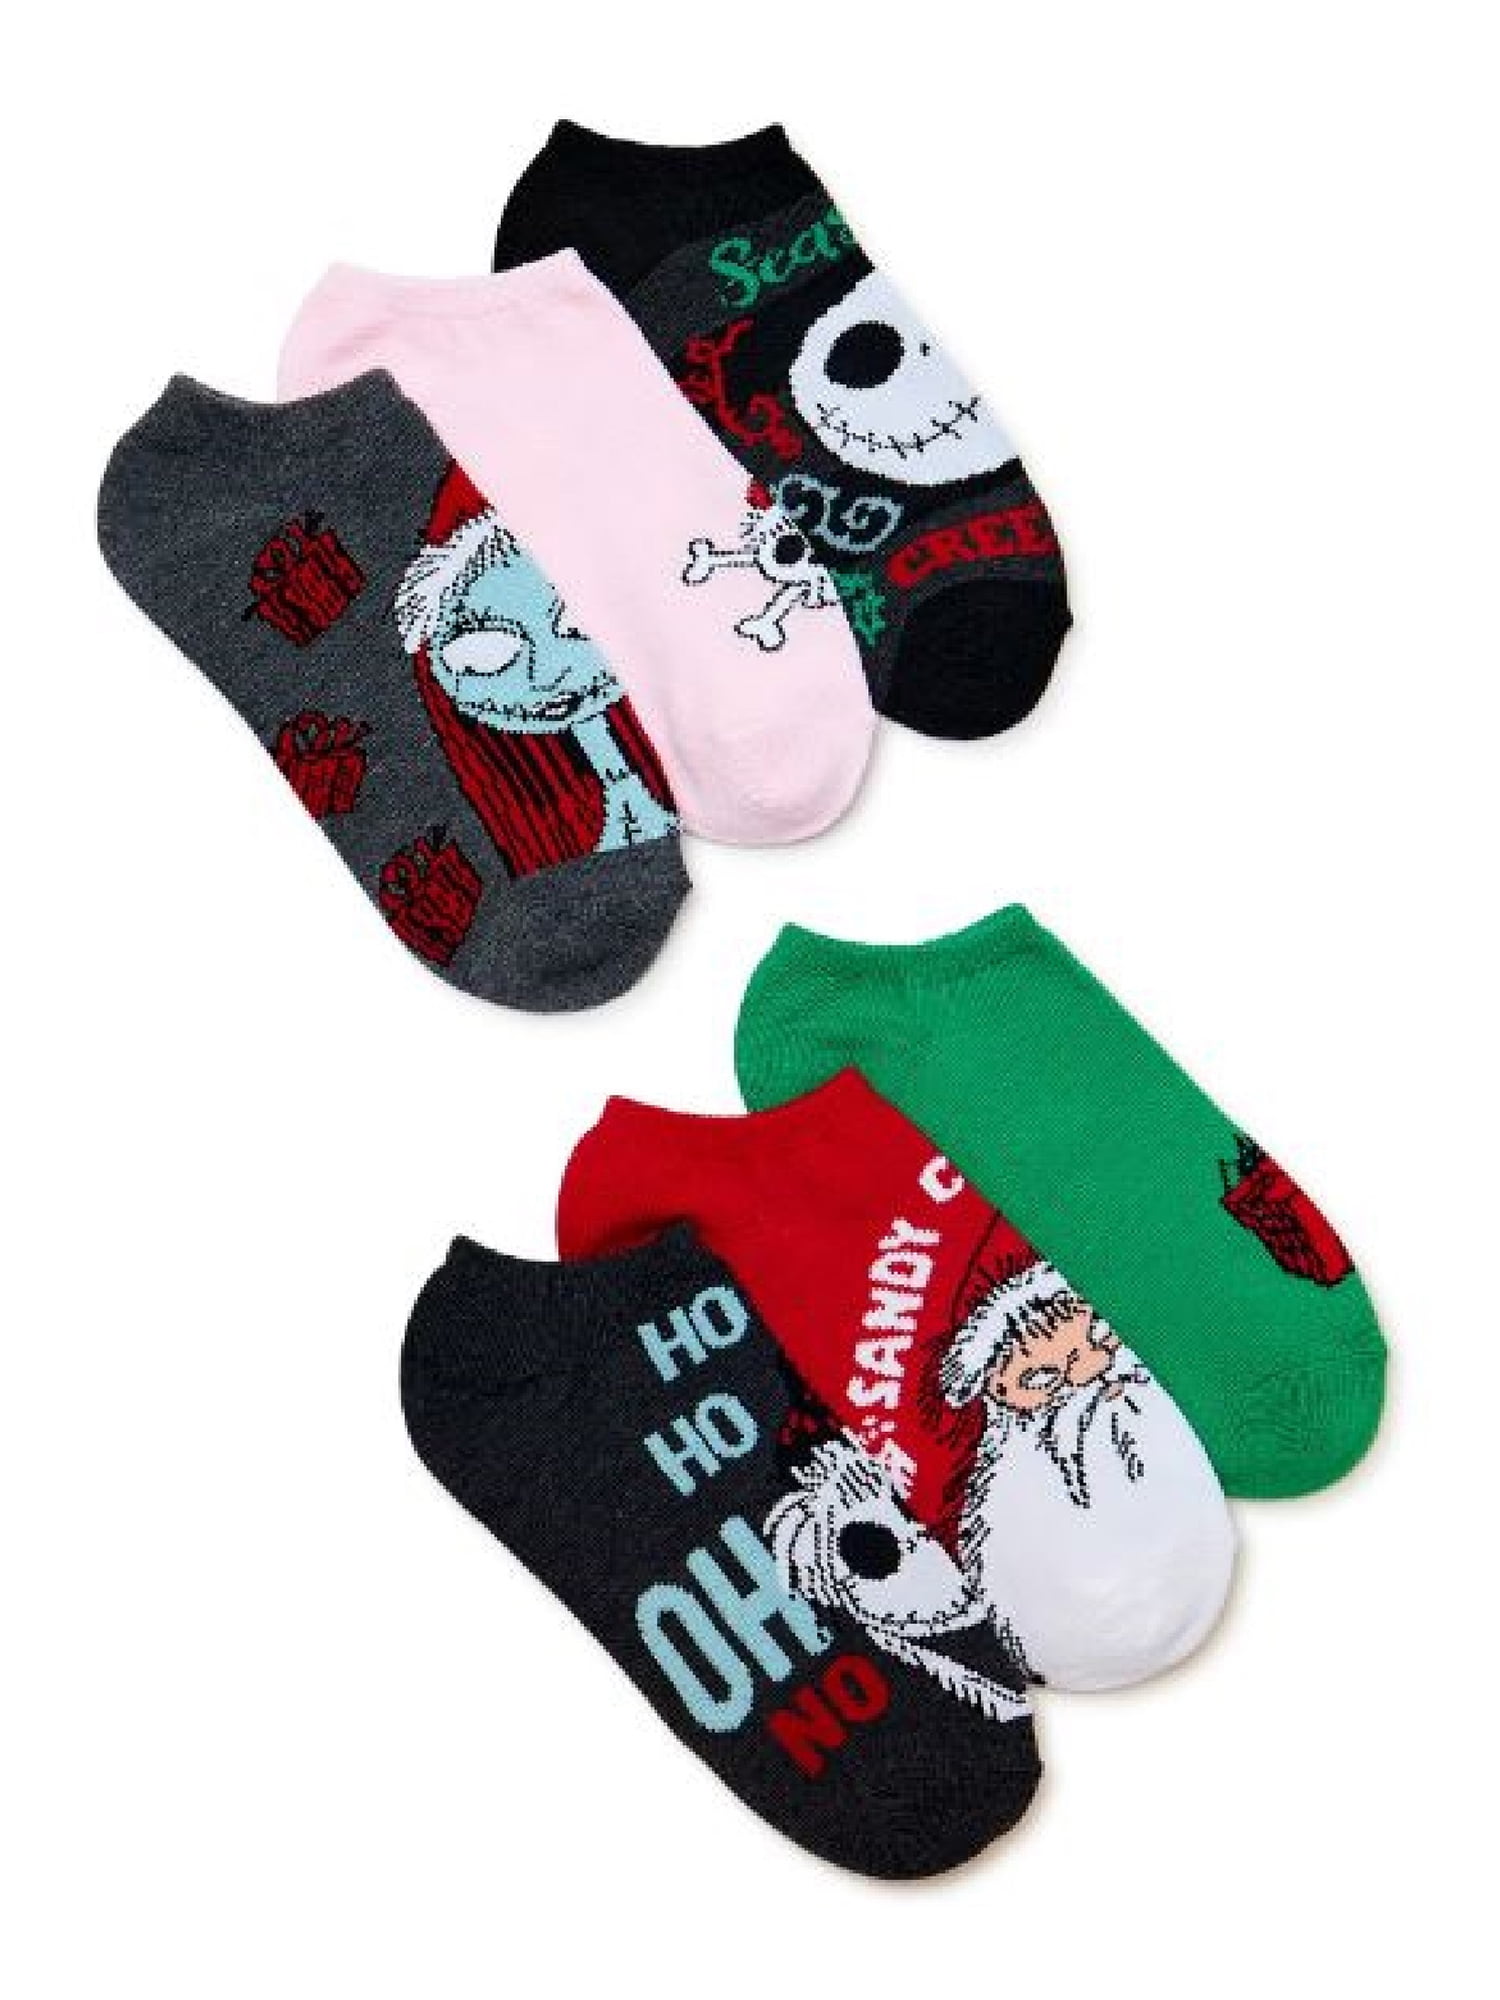 The Nightmare Before Christmas Disney Nightmare Before Christmas, Holiday Women's No-Show Socks, 6-Pack, Size 4-10